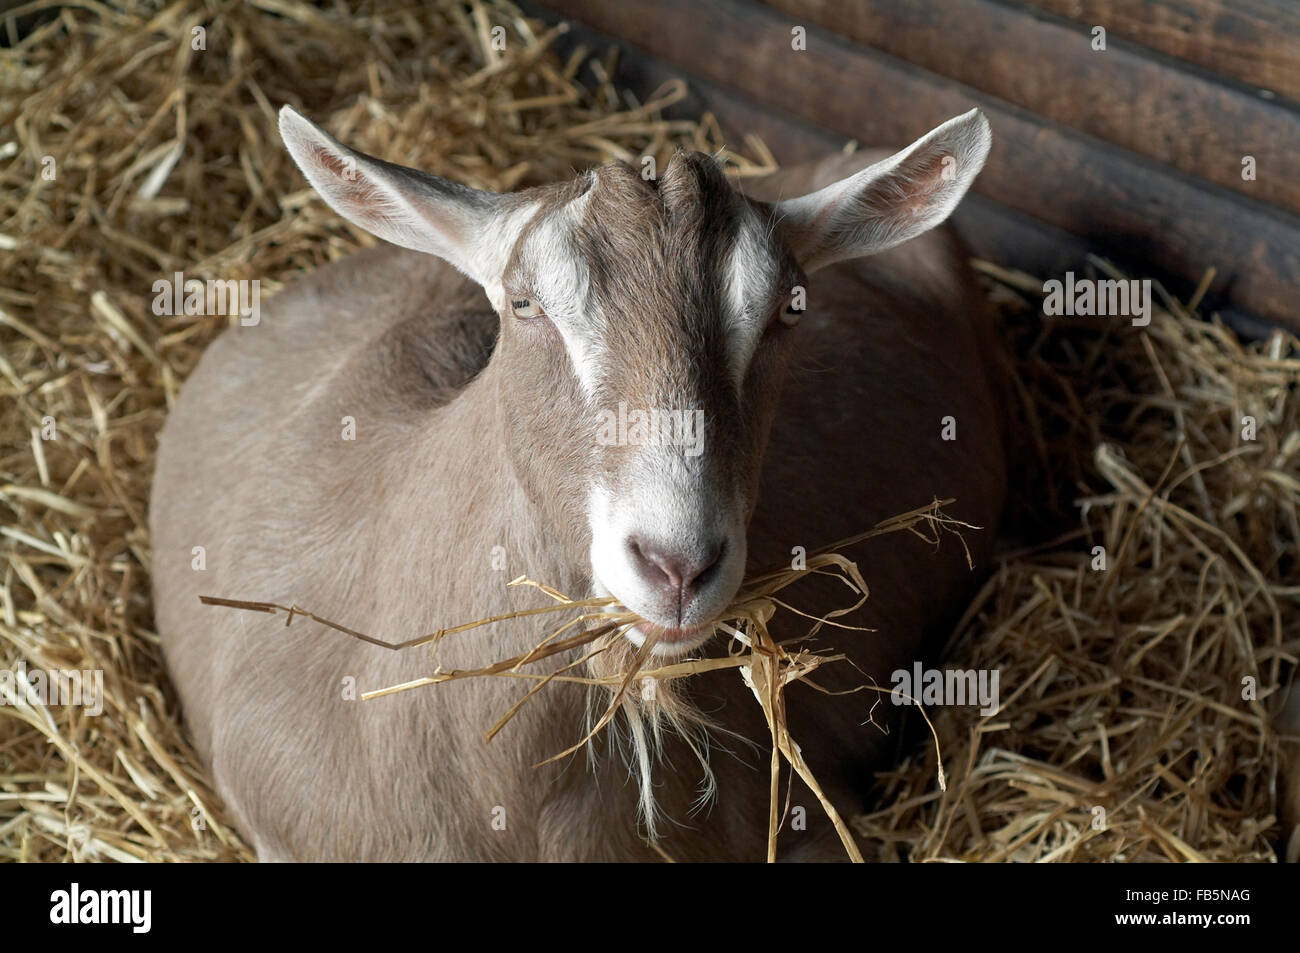 Goat in the shed with straw in mouth england UK europe Stock Photo